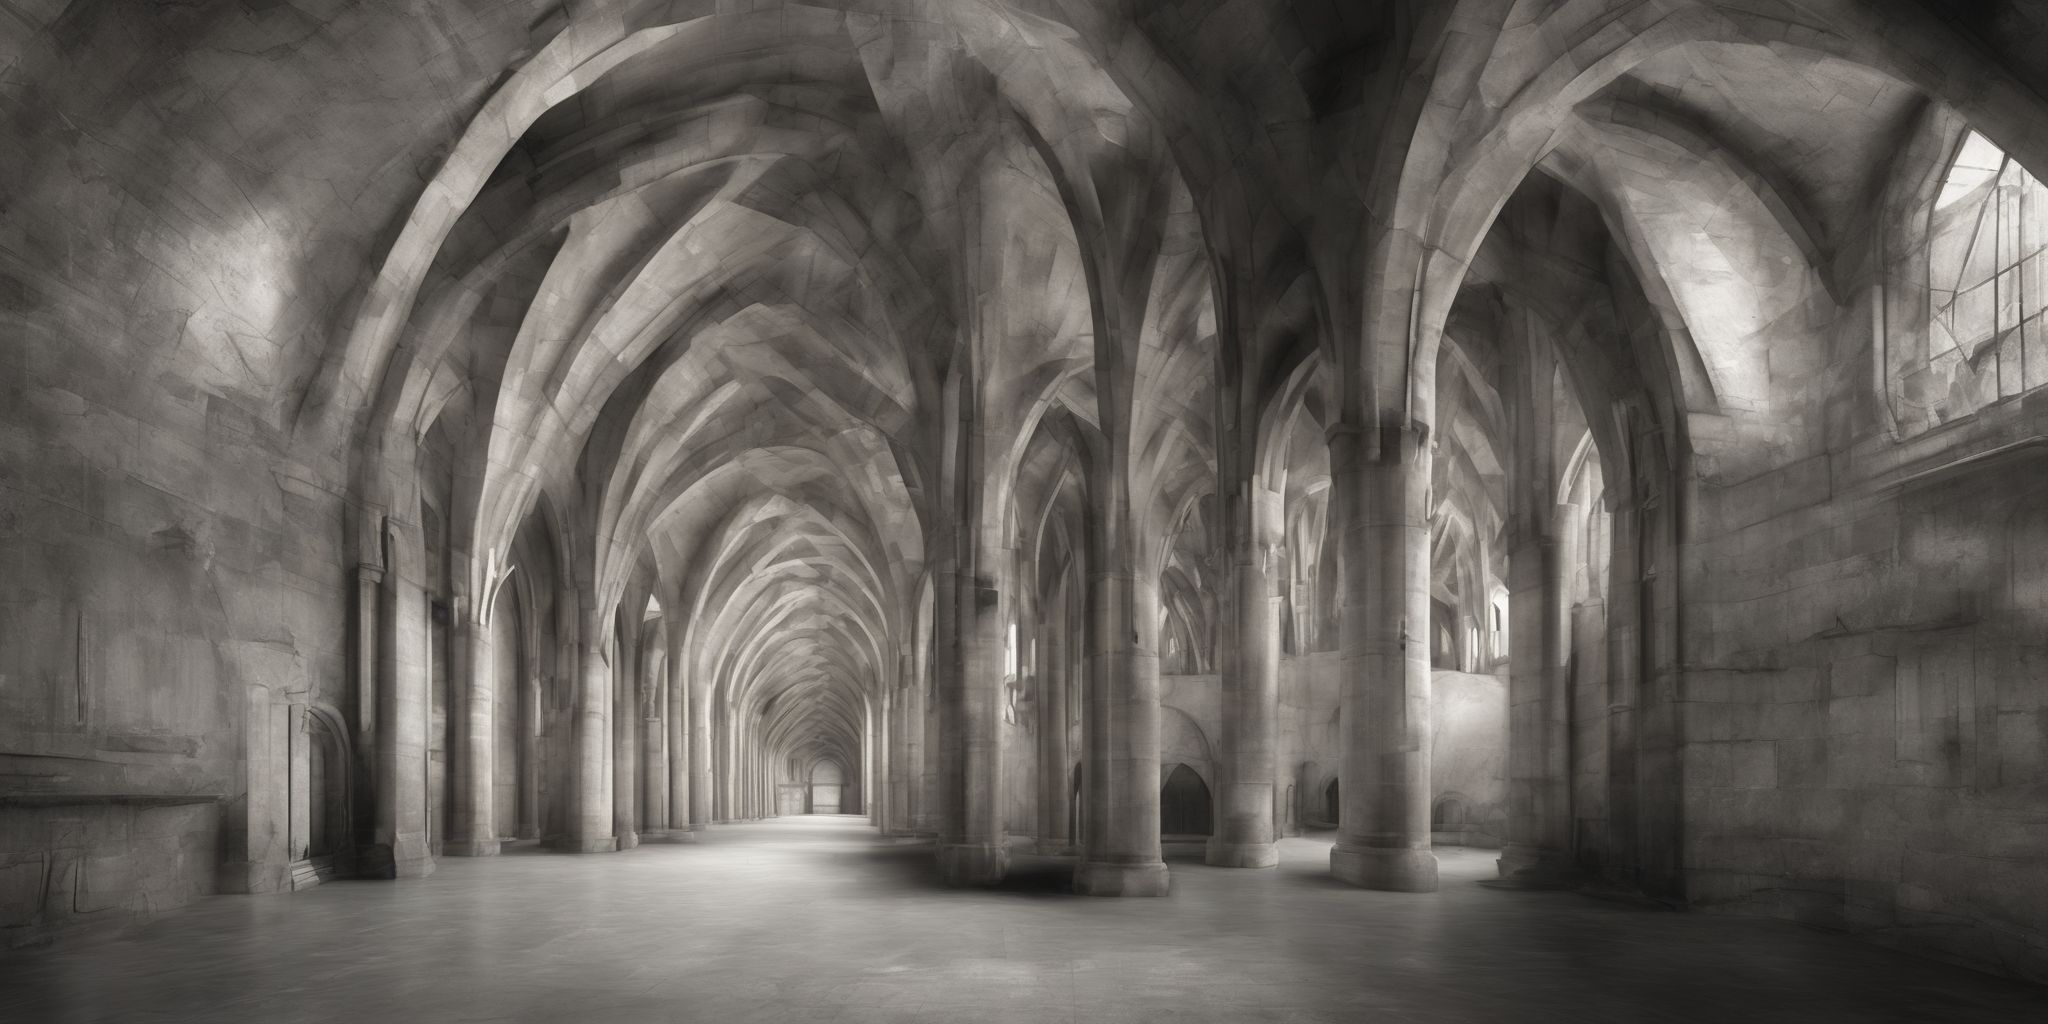 Vaults  in realistic, photographic style